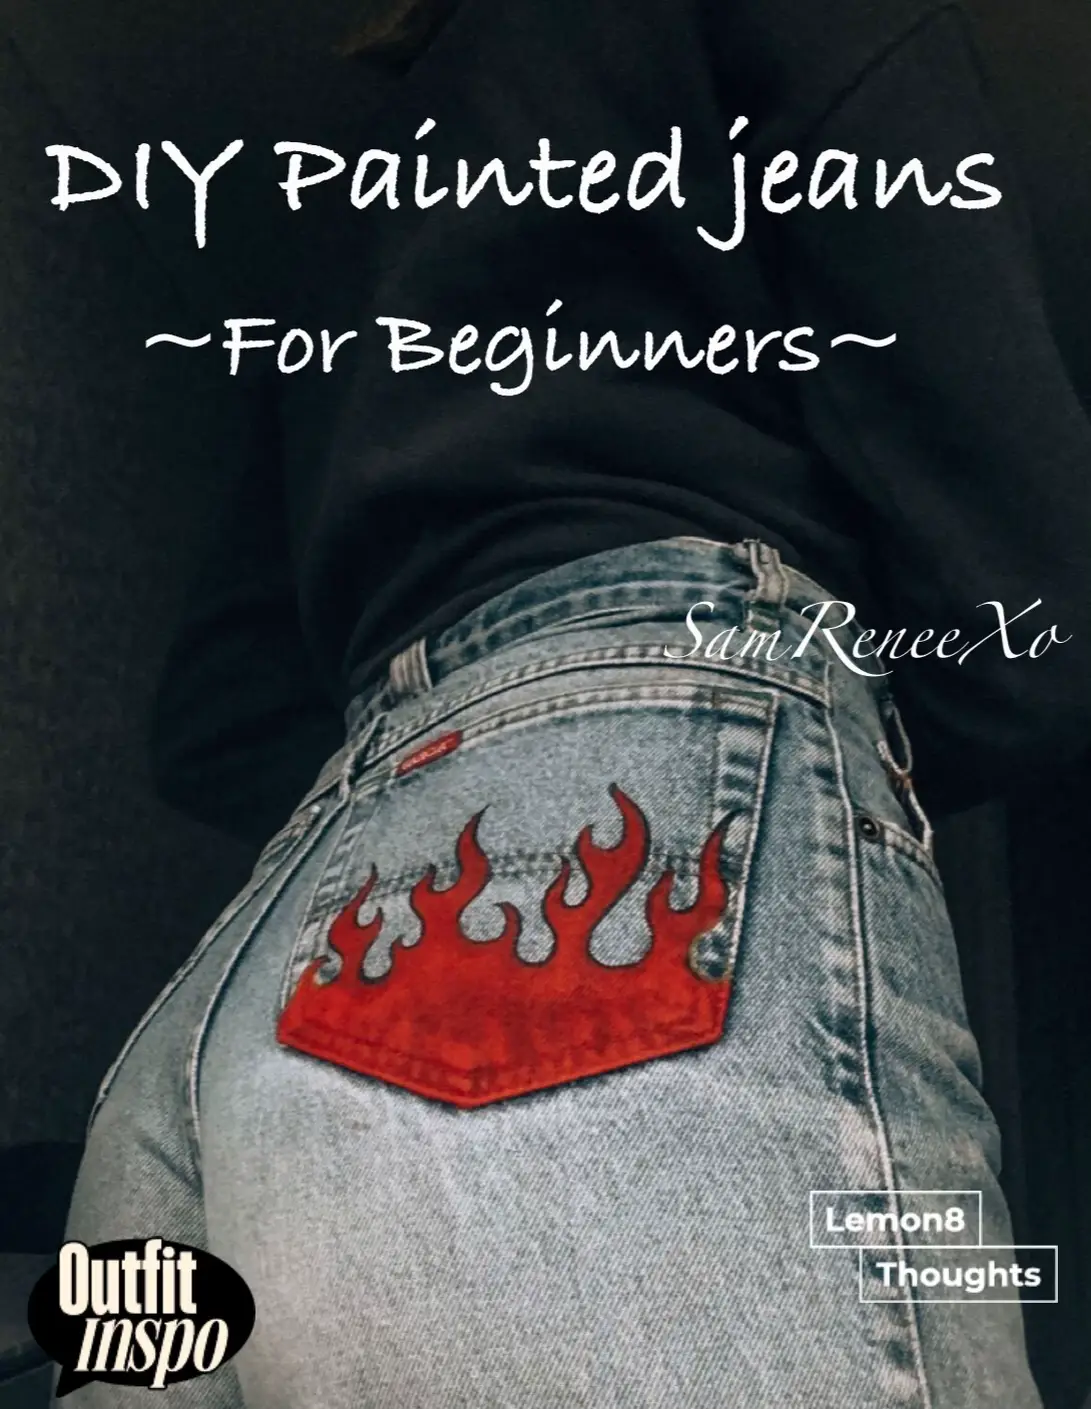 Tips & Tricks for Upcycling your Jeans into Trendy Bermuda Shorts 💙 thrift  flip DIY 